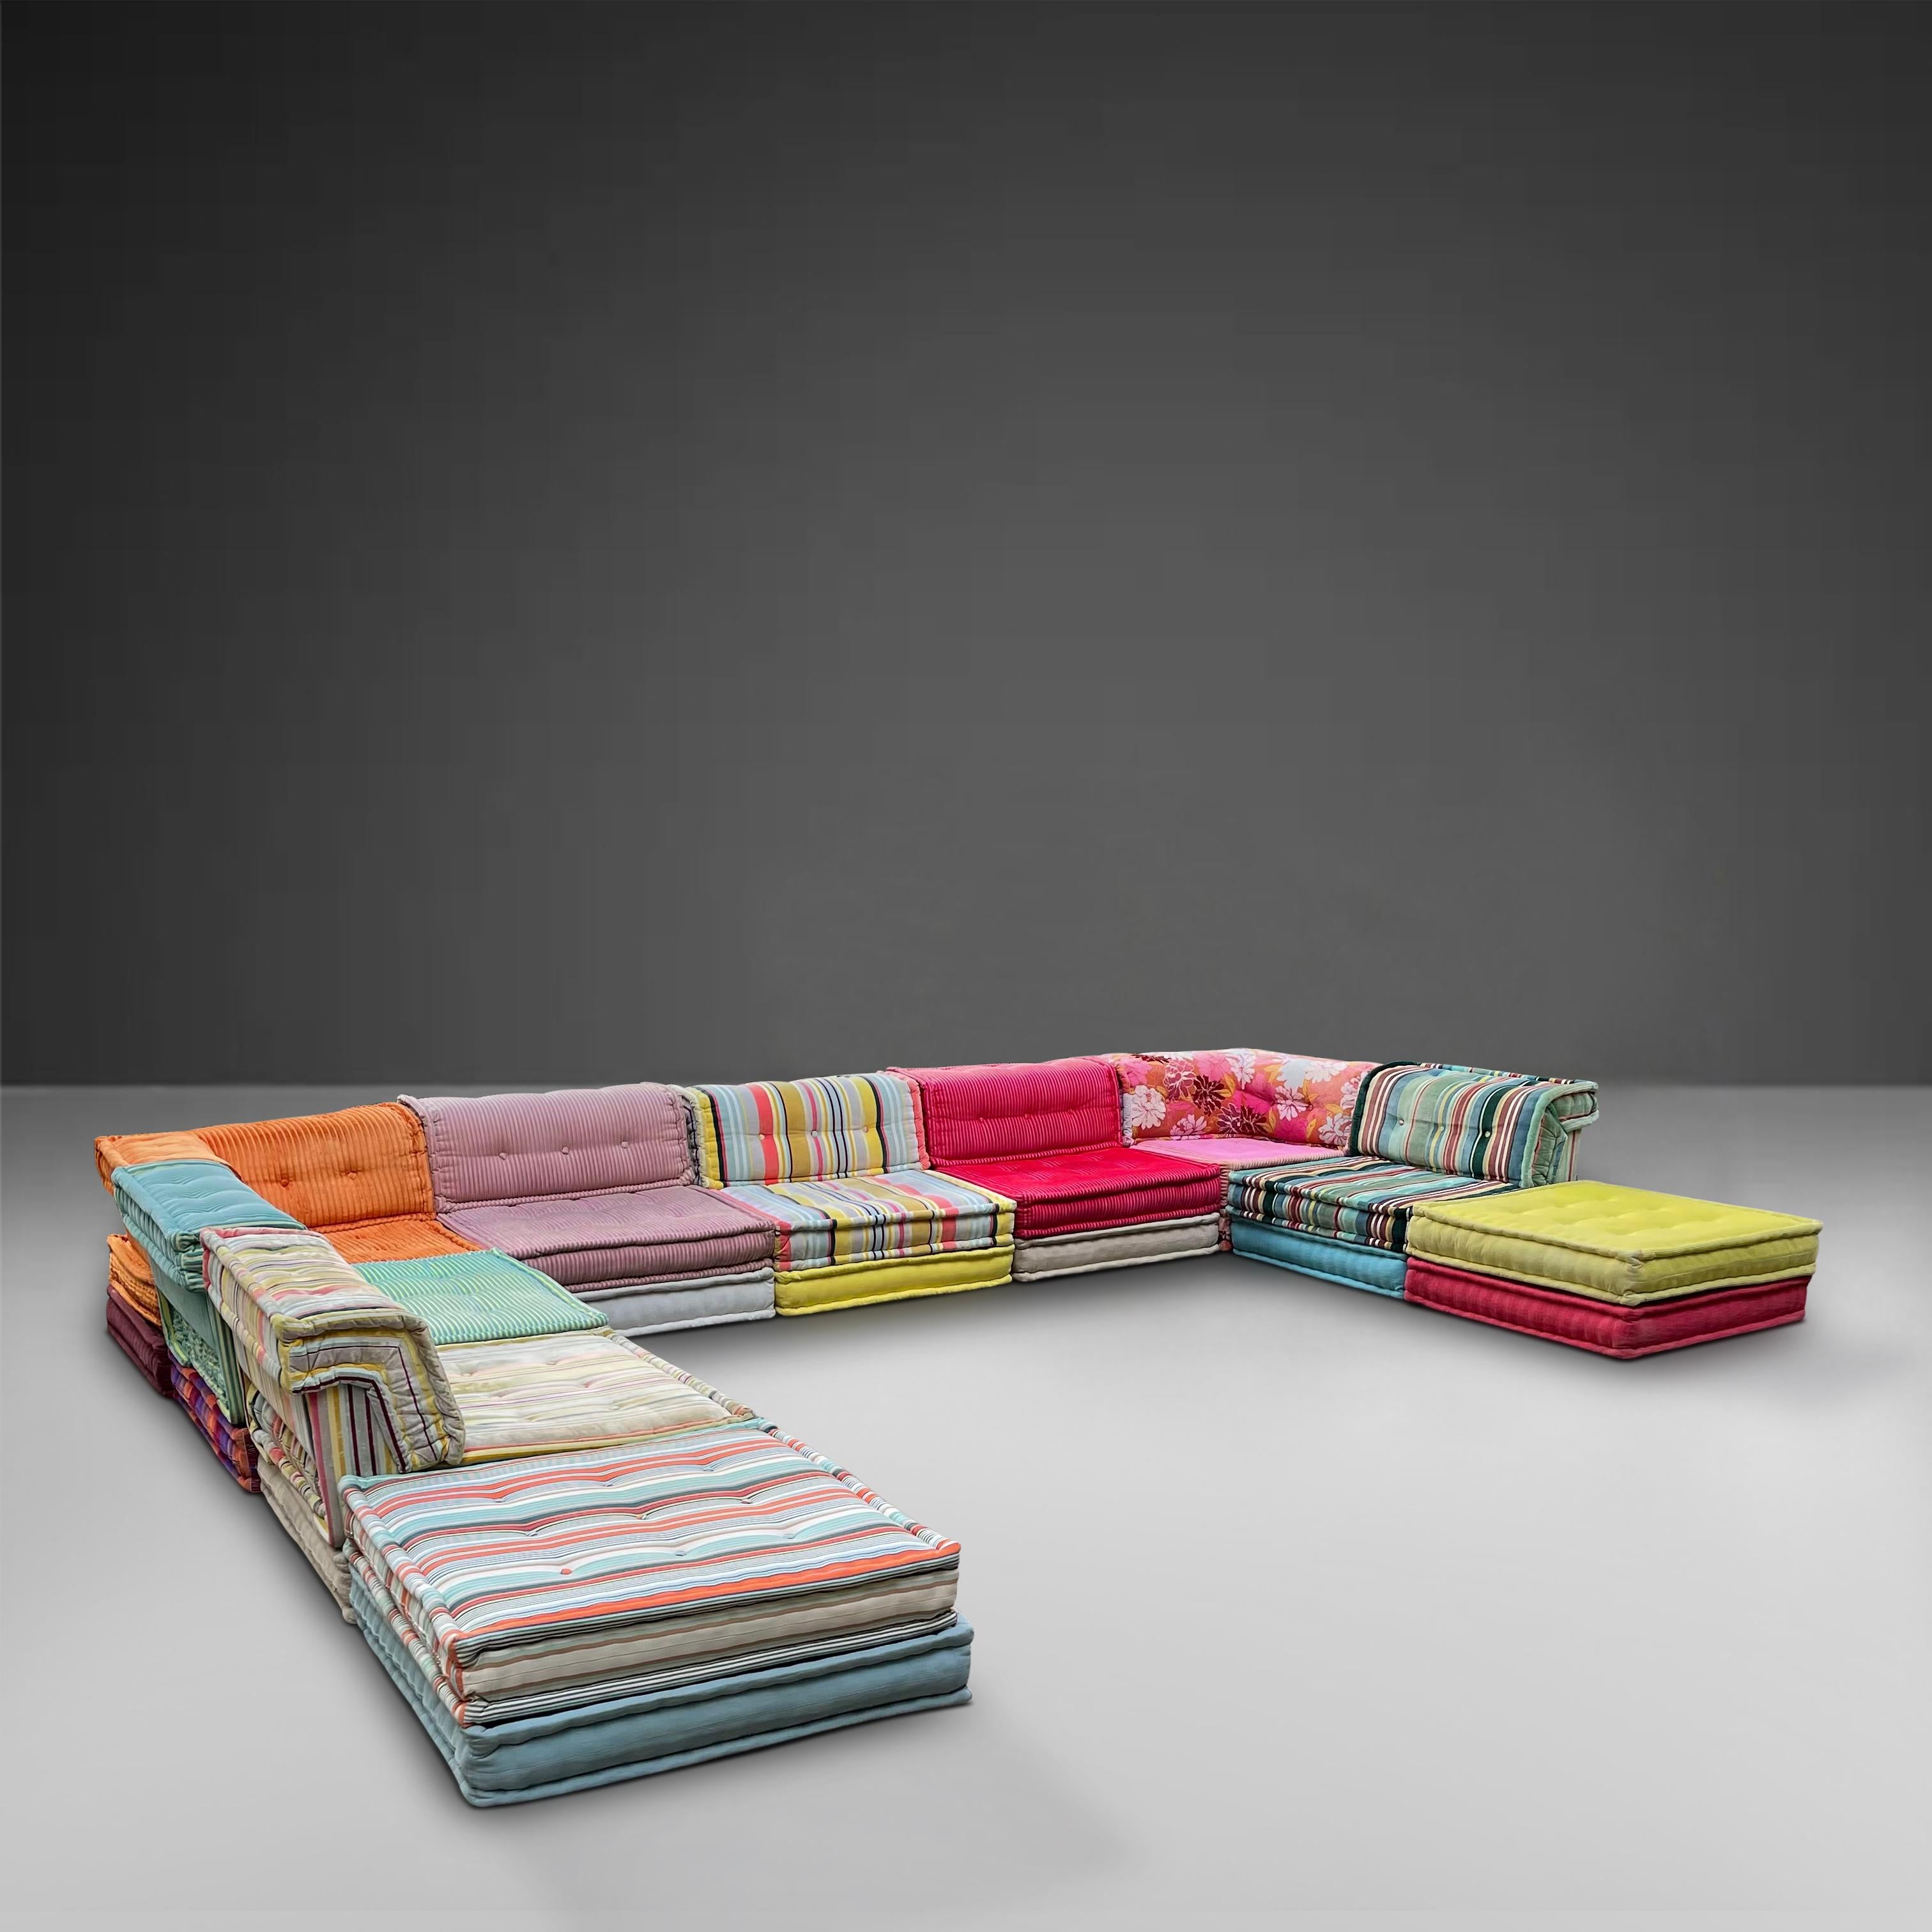 Fabric 'Mah Jong' Modular Sectional Sofa Signed by Roche Bobois, France 2010 For Sale